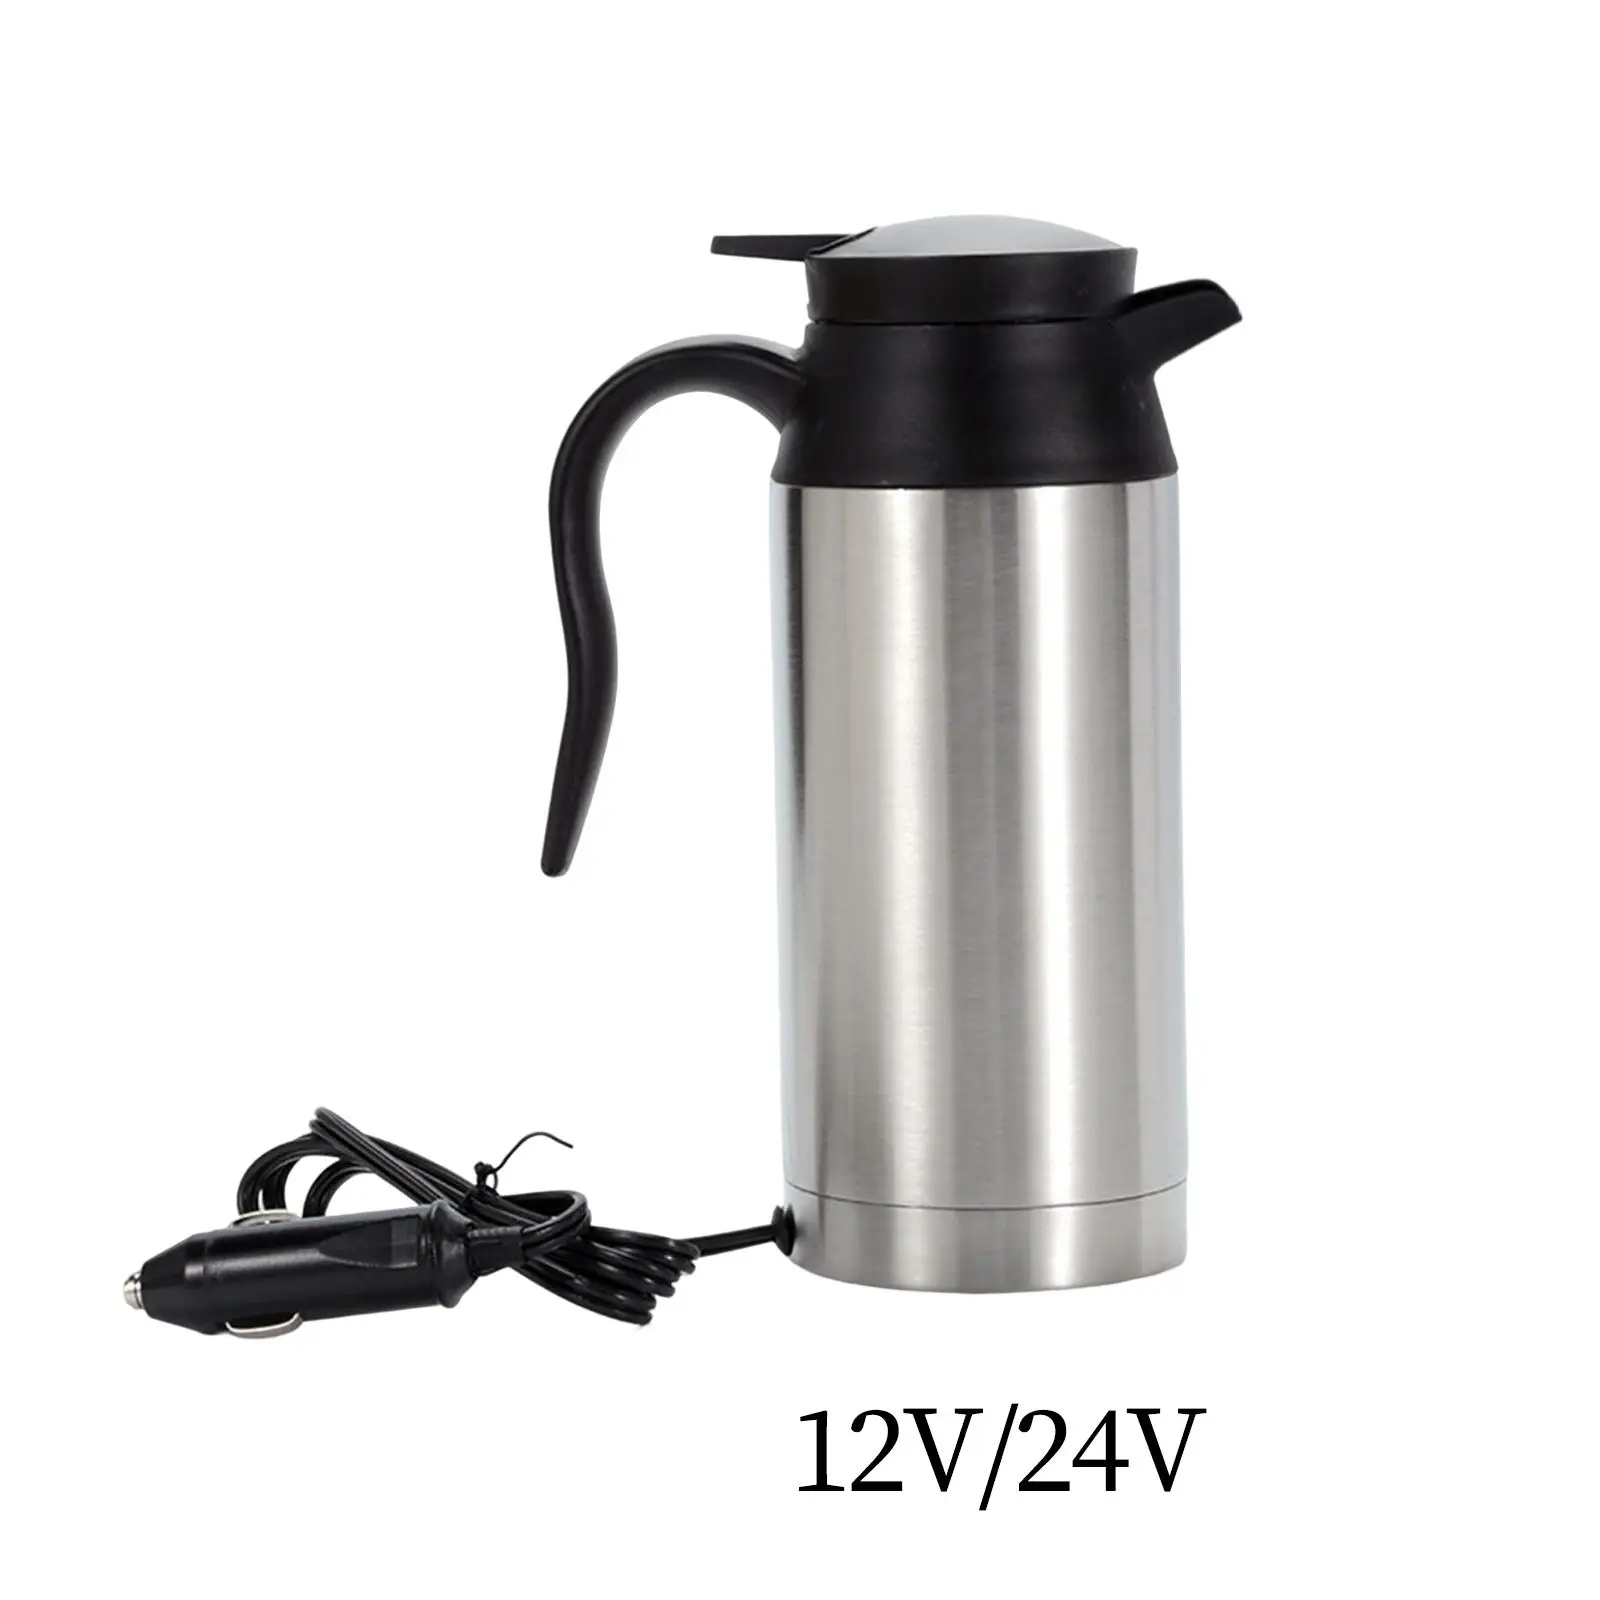 750ml Stainless Steel Electric Car Kettle Heating Cup Durable Coffee Mug Pot